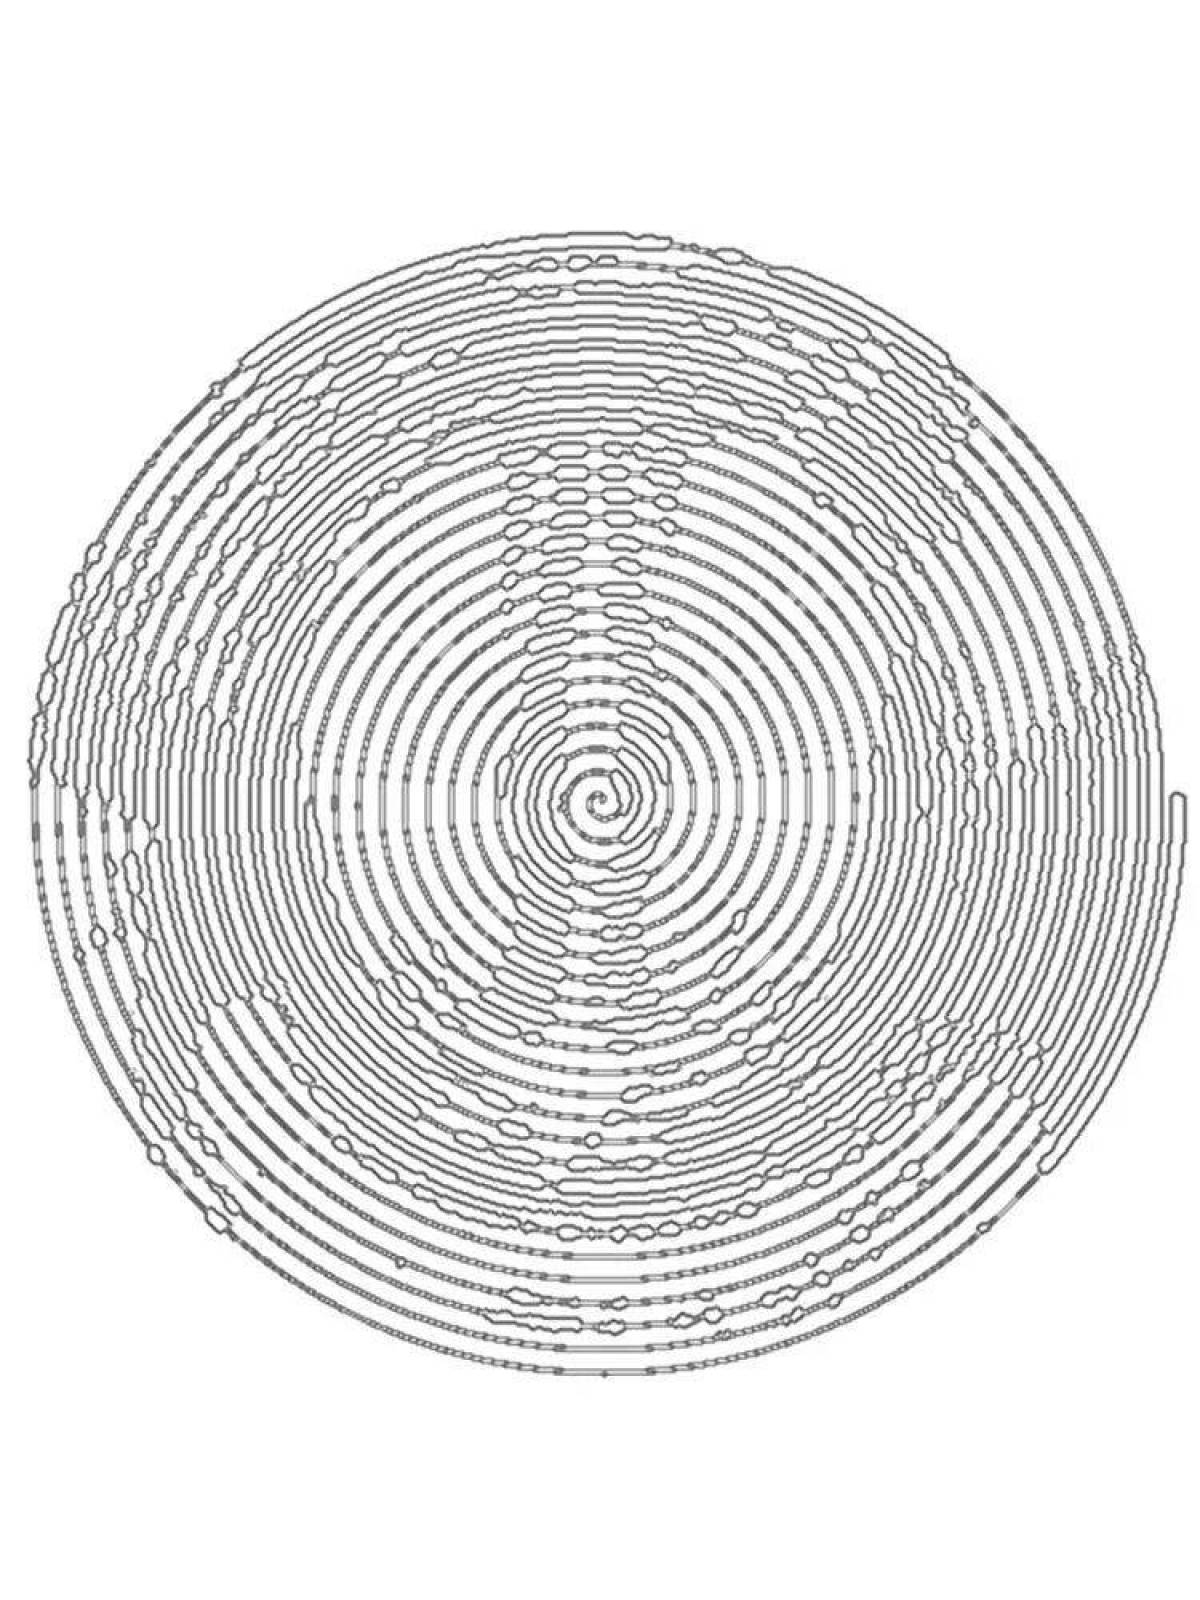 Create a coloring page with a bright circular spiral